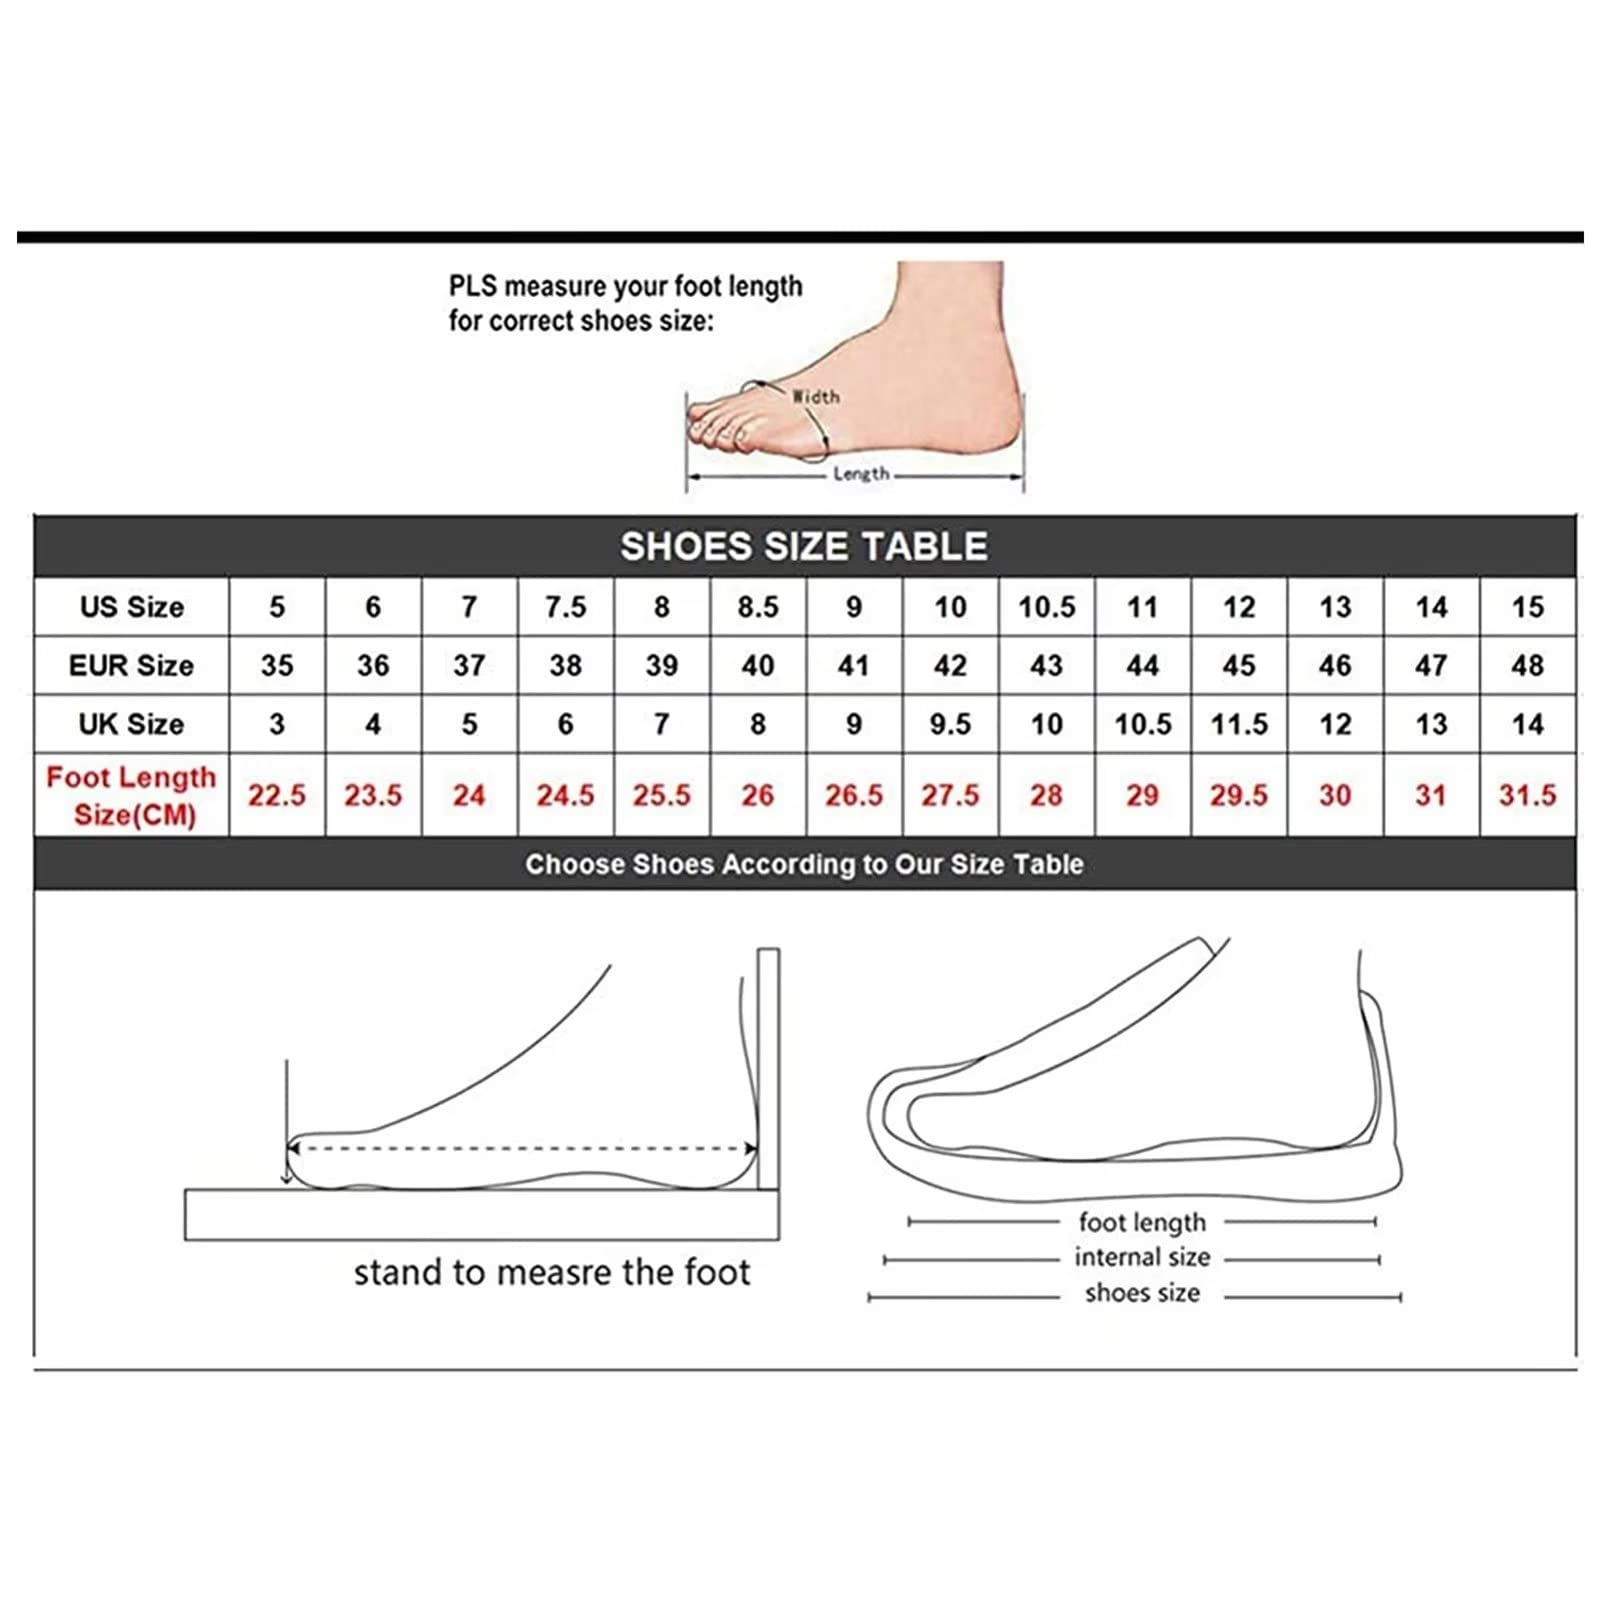 Yzaoxia Breast Cancer Shoes for Women Pink Ribbon Tennis Shoes Size 8.5 Lightweight Breathable Running Sneakers Comfortable Walking Shoes Casual Flat